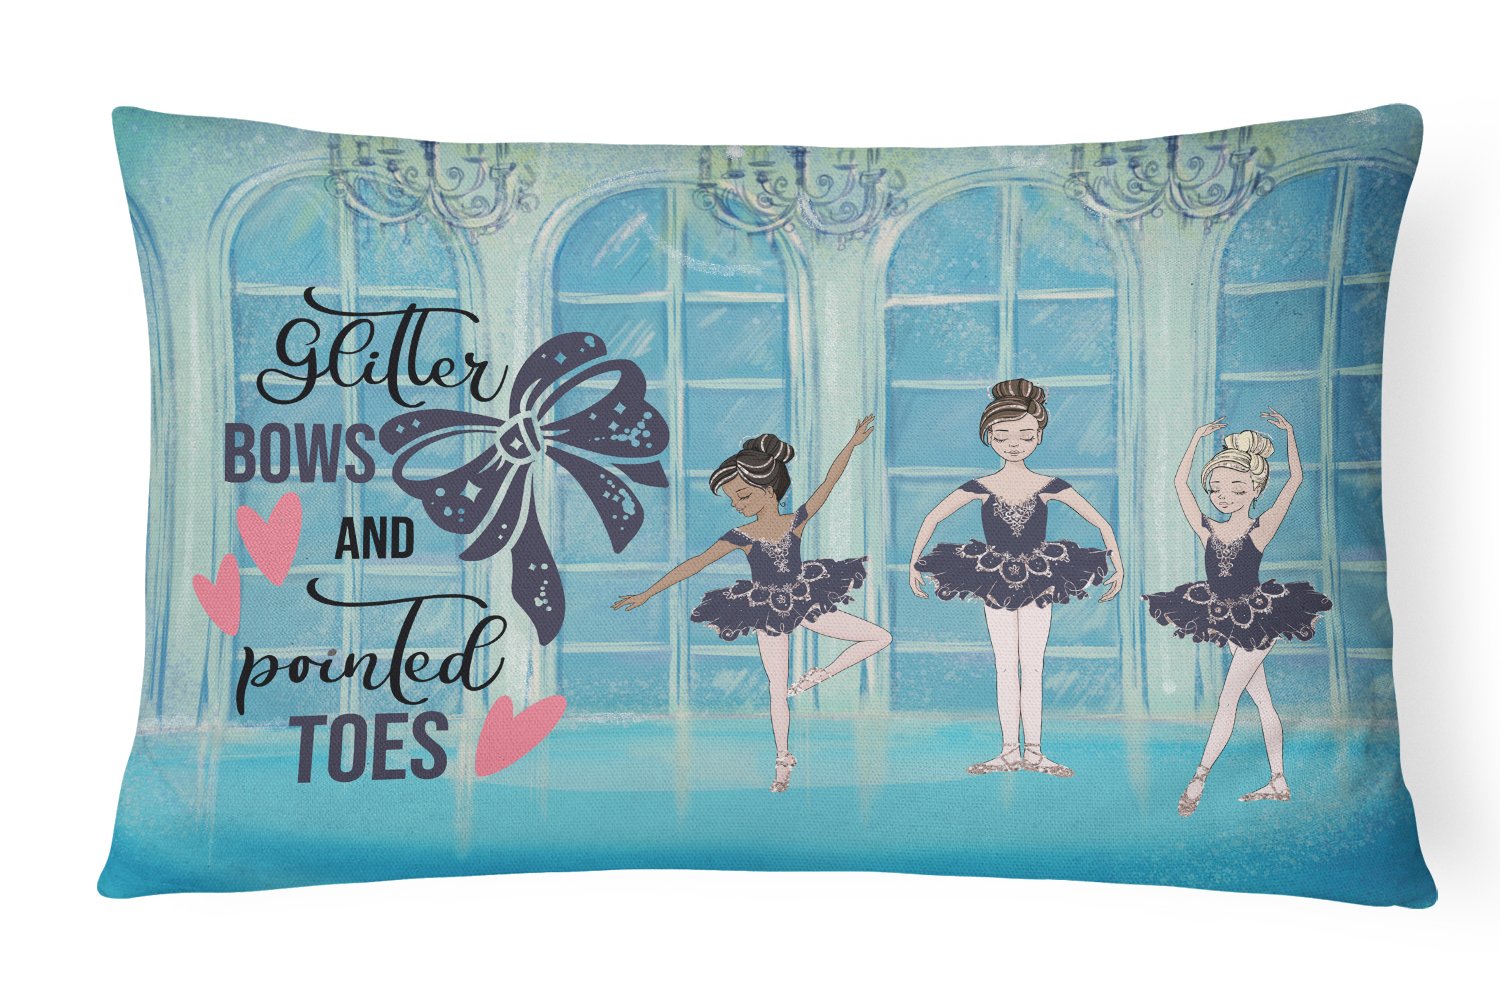 Buy this Glitter Bows and Pointed Toes Dance Canvas Fabric Decorative Pillow